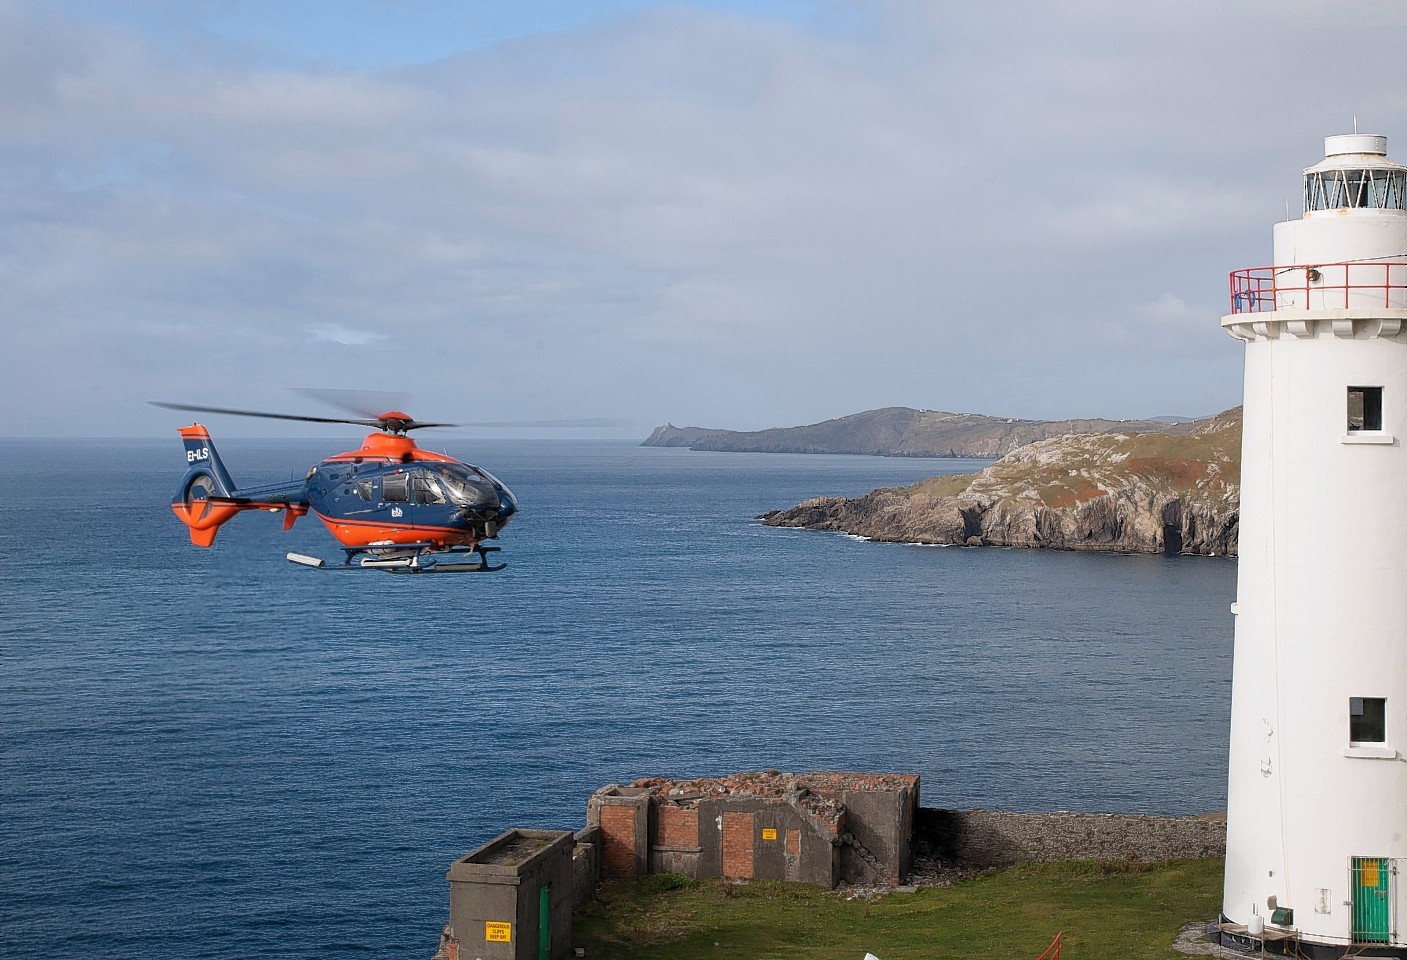 One of PDG's EC 135 helicopters carries out work at Ardnakinna Lighthouse in Ireland